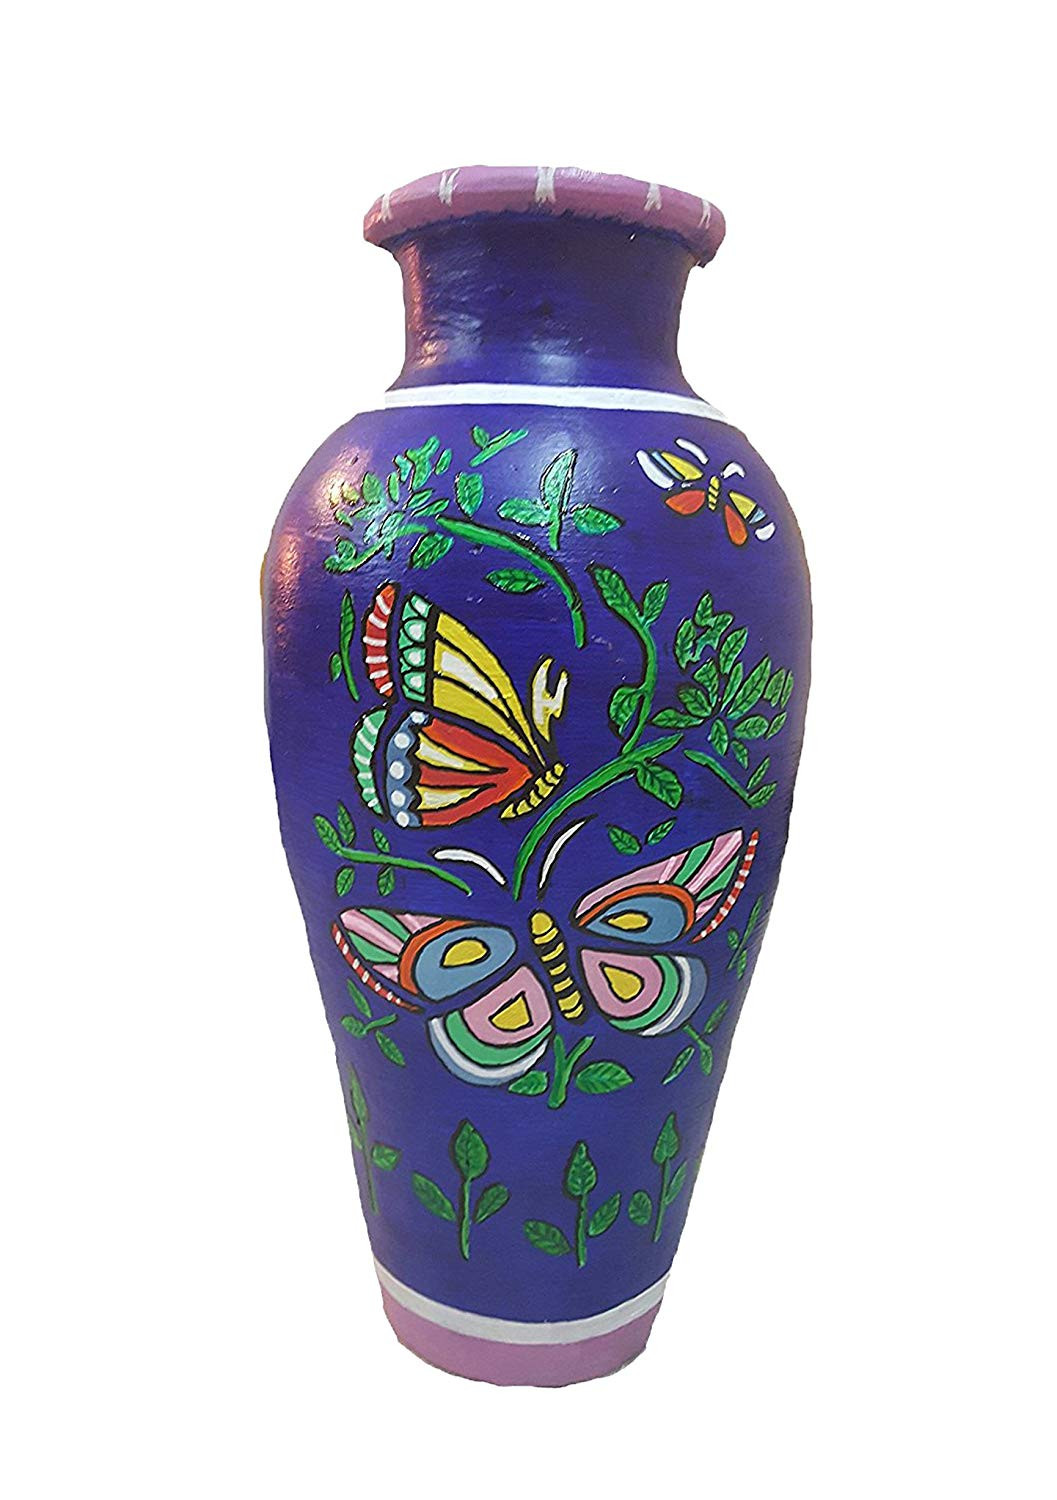 12 Great Large Yellow Ceramic Vase 2024 free download large yellow ceramic vase of buy shree fine arts butterfly hand painted terracotta vase large regarding buy shree fine arts butterfly hand painted terracotta vase large online at low prices 